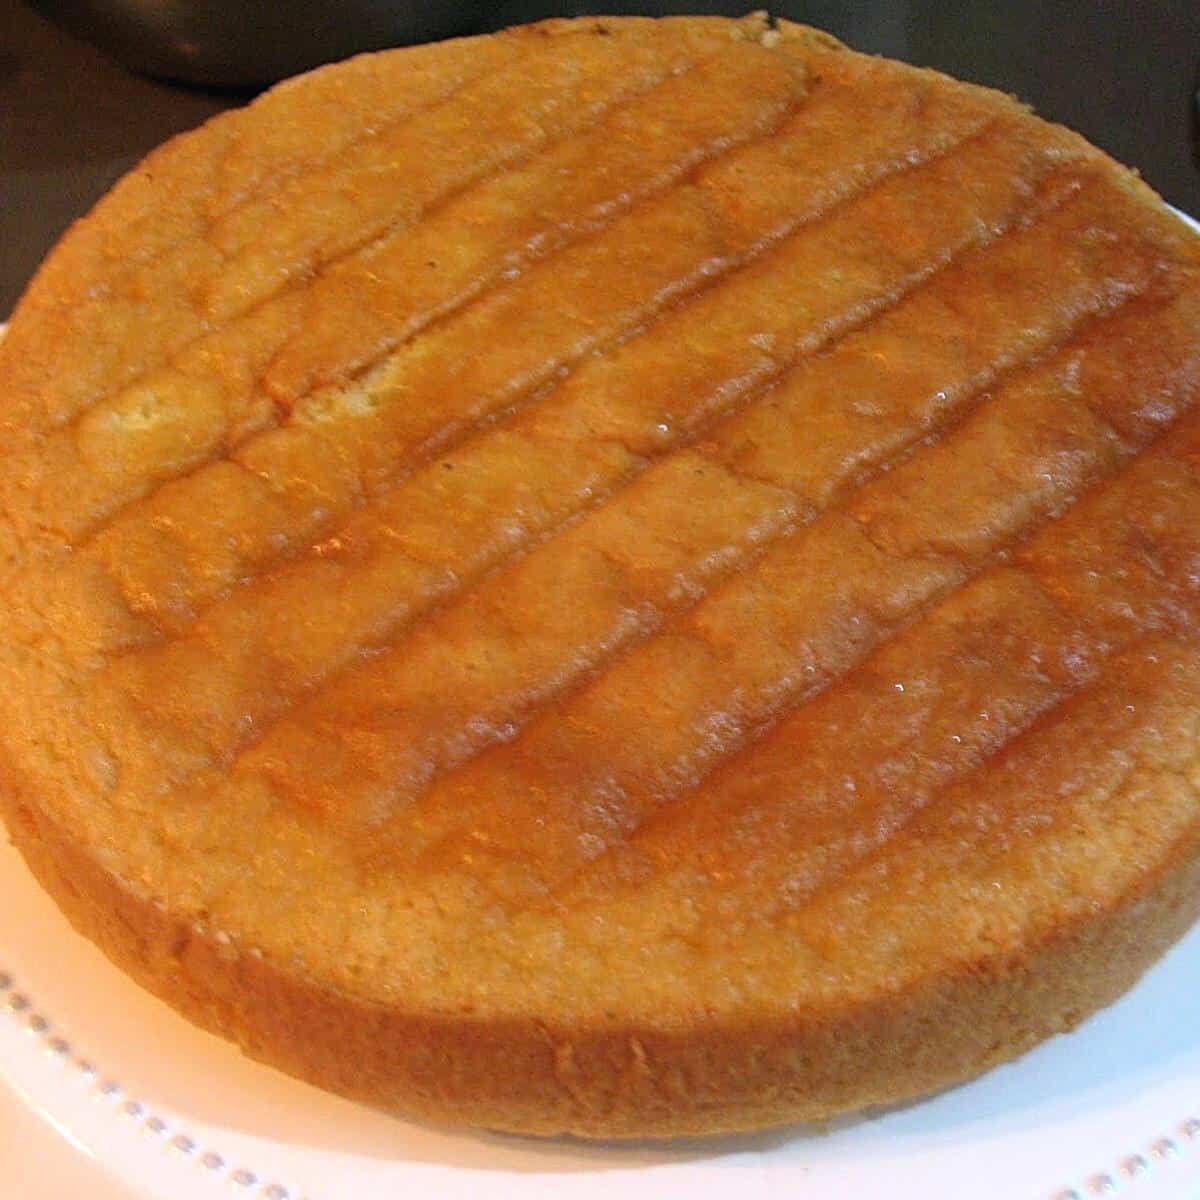 A baked genoise cake on the cake stand.